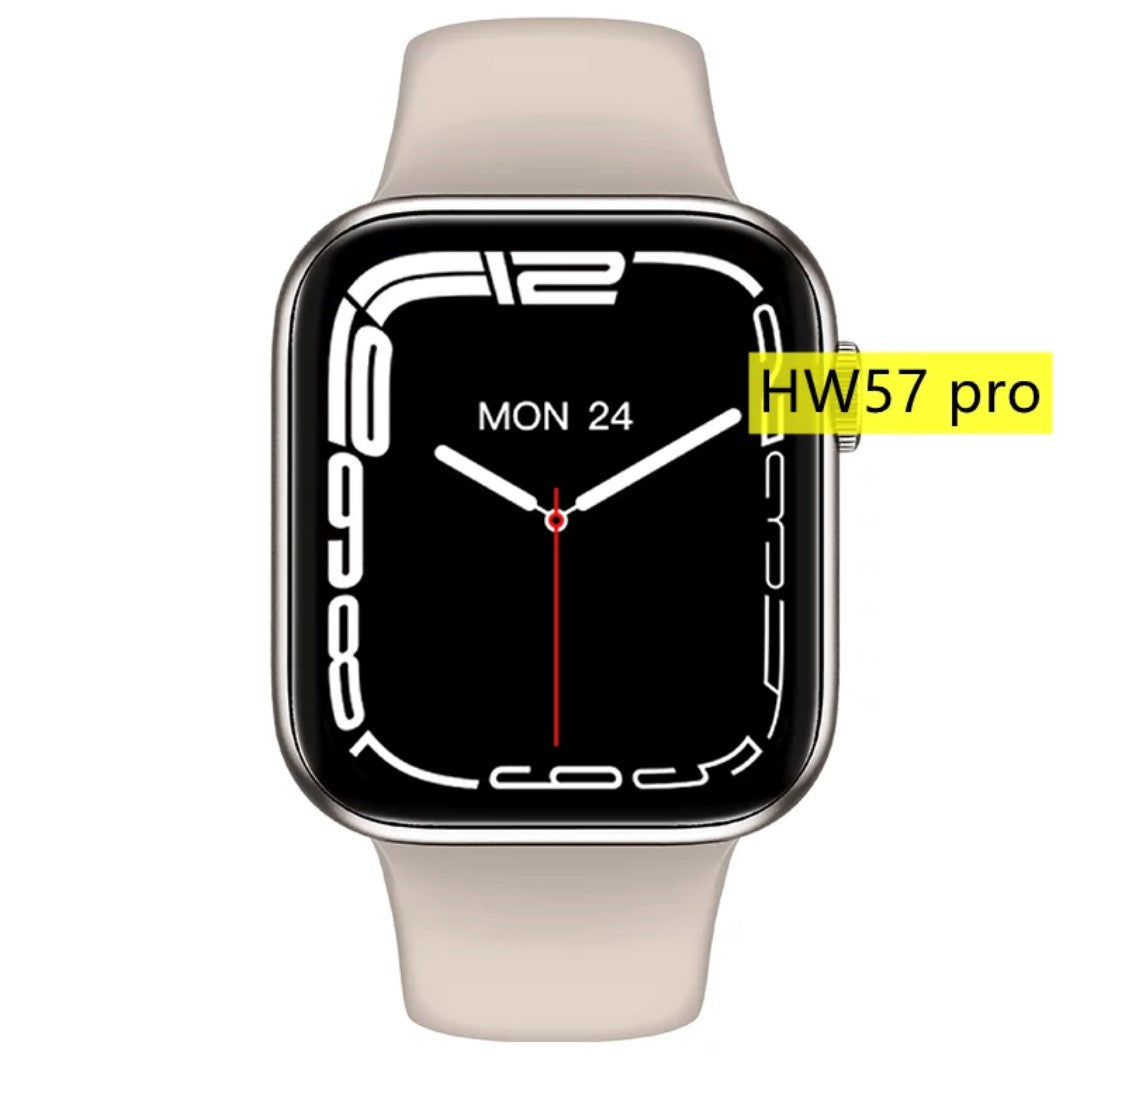 HW 57 Pro Slver- Verious Colour Straps Availible at R68 Each. Smart Watch South Africa